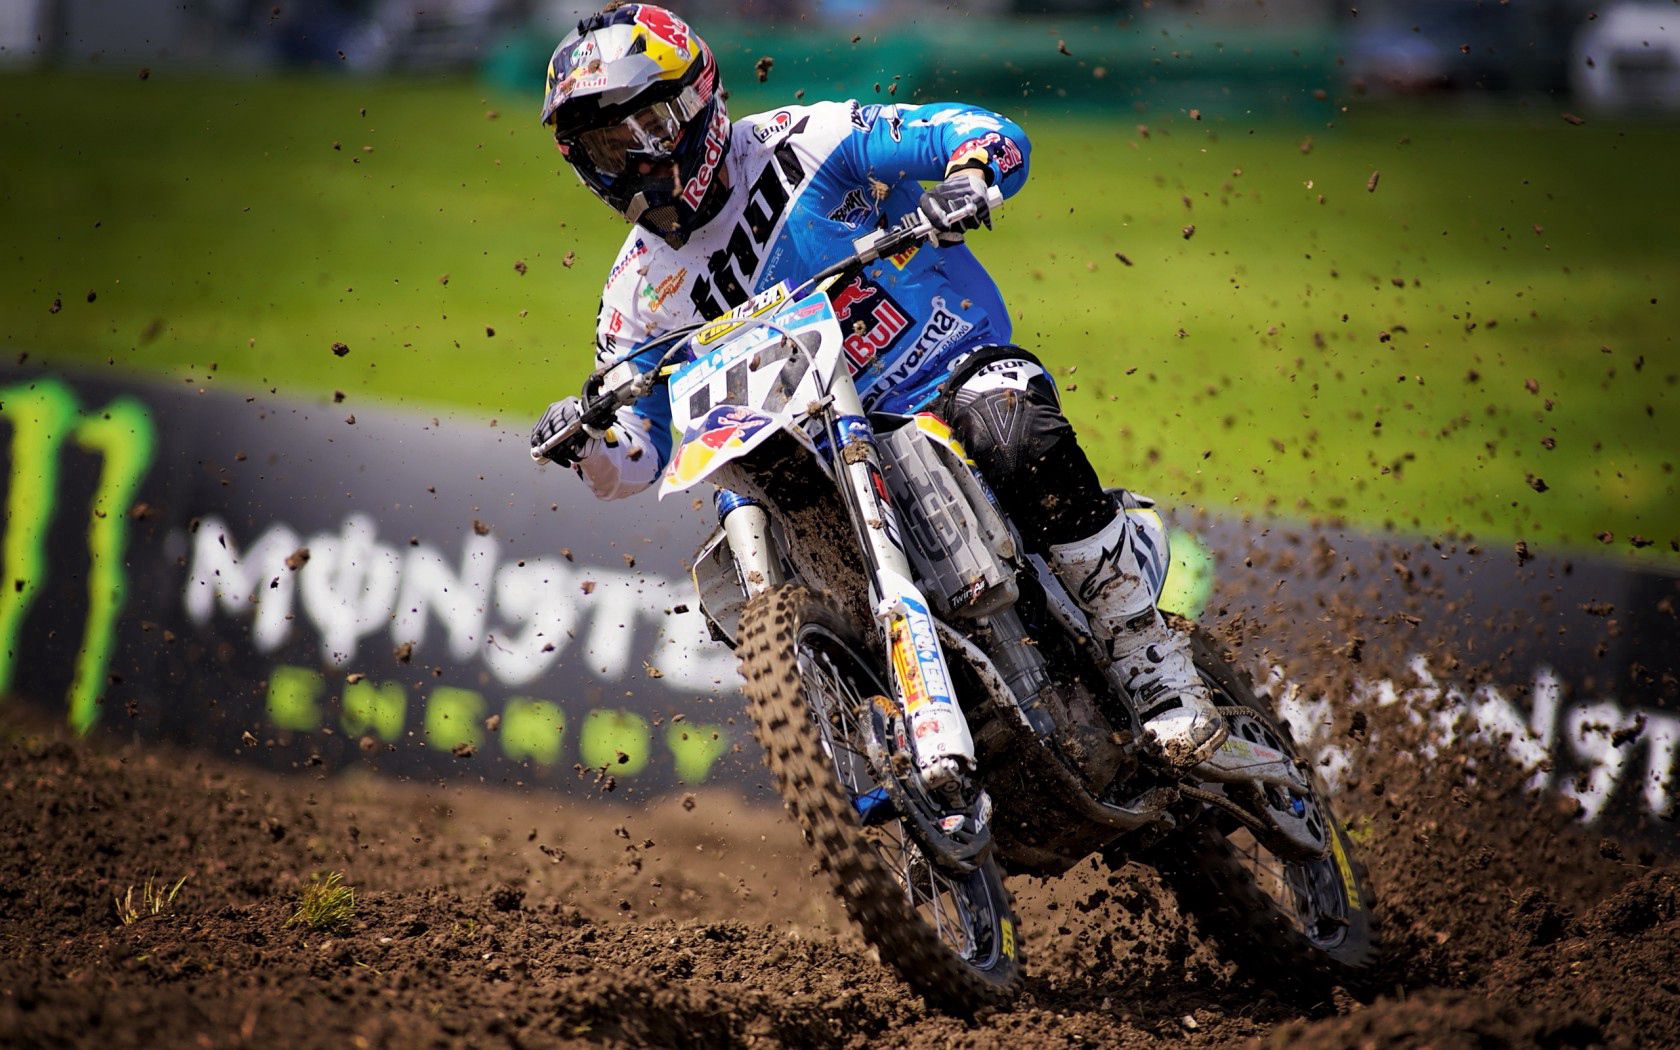 race, motorcycle, motorcyclist, motorcycles, mud, dirt High Definition image